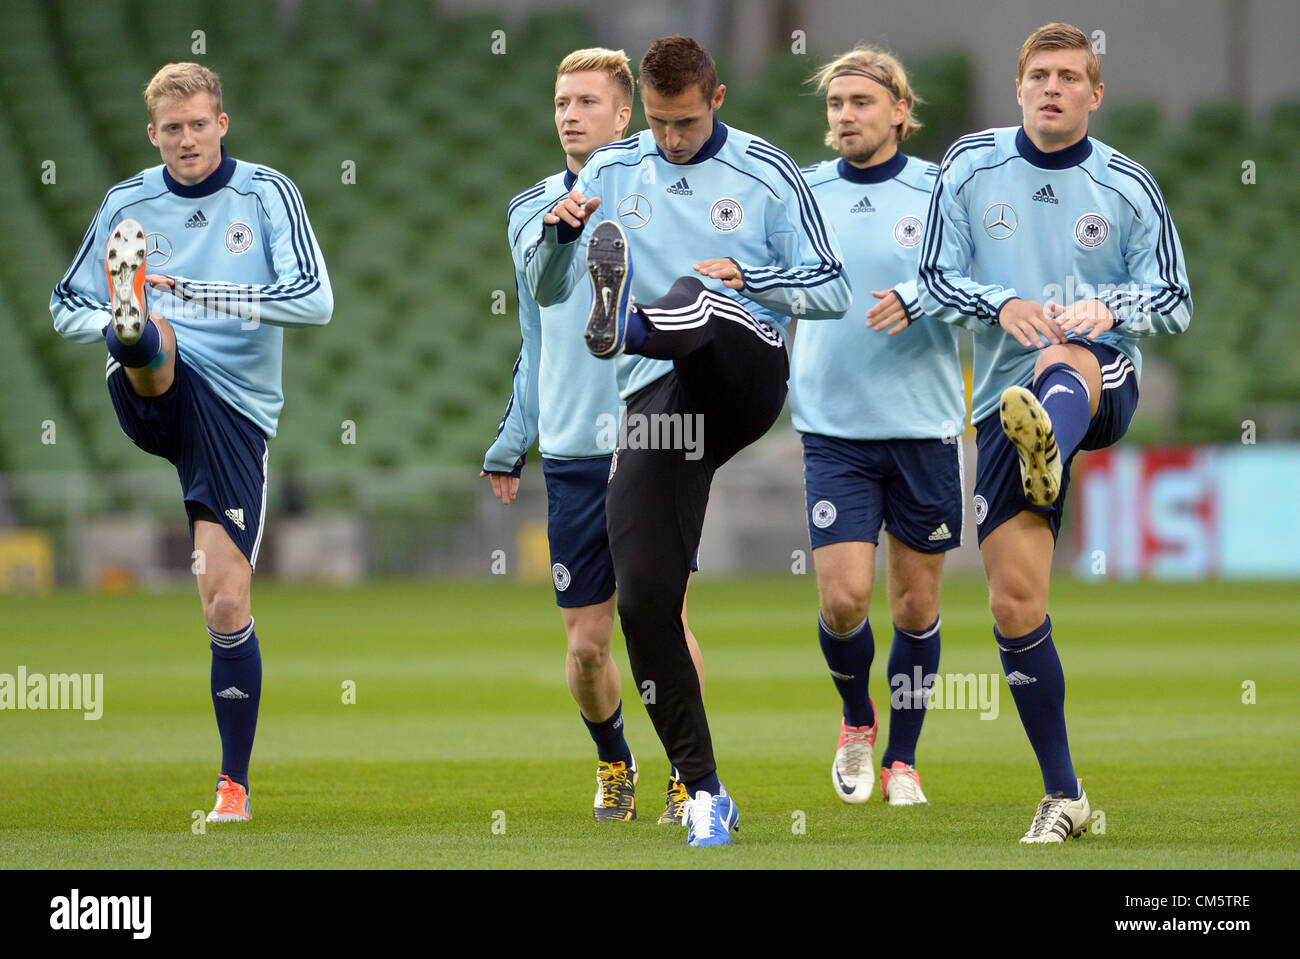 11.10.2012. Aviva Stadium, Dublin, Ireland.  Germany's Andre Schuerrle (L-R), Marco Reus, Miroslav Klose, Marcel Schmelzer and Toni Kroos takes part in training at Aviva Stadium in Dublin, Ireland, 11 October 2012. The German national team will play a World Cup qualification match against Ireland on 12 October 2012. Stock Photo